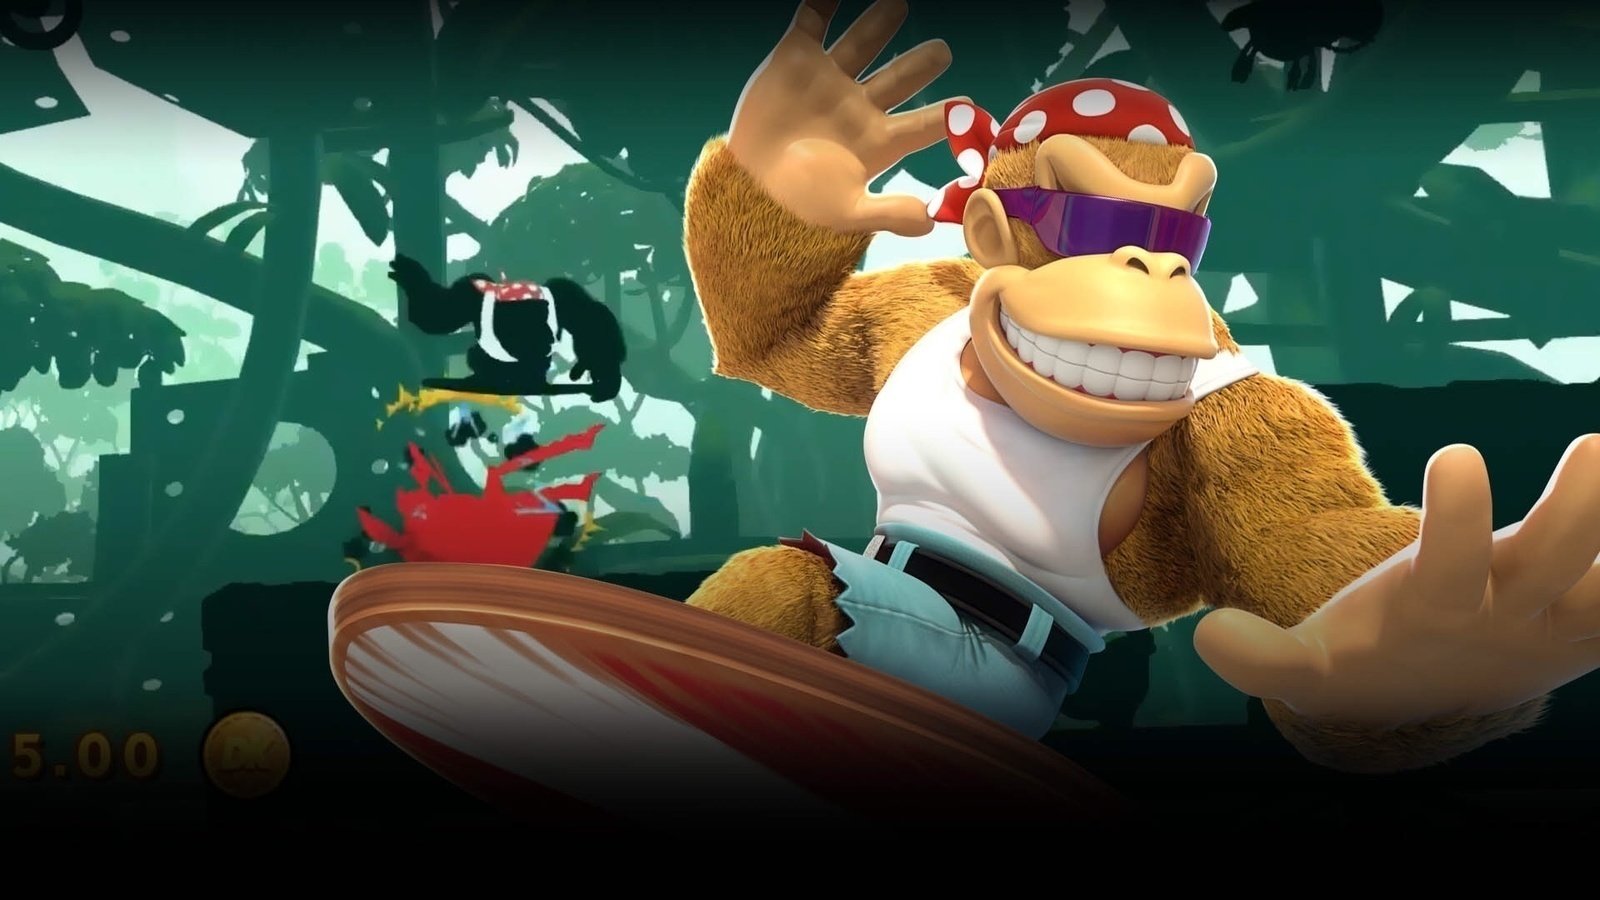 Petition · Add Funky Kong to Super Smash Bros Ultimate · Change.org